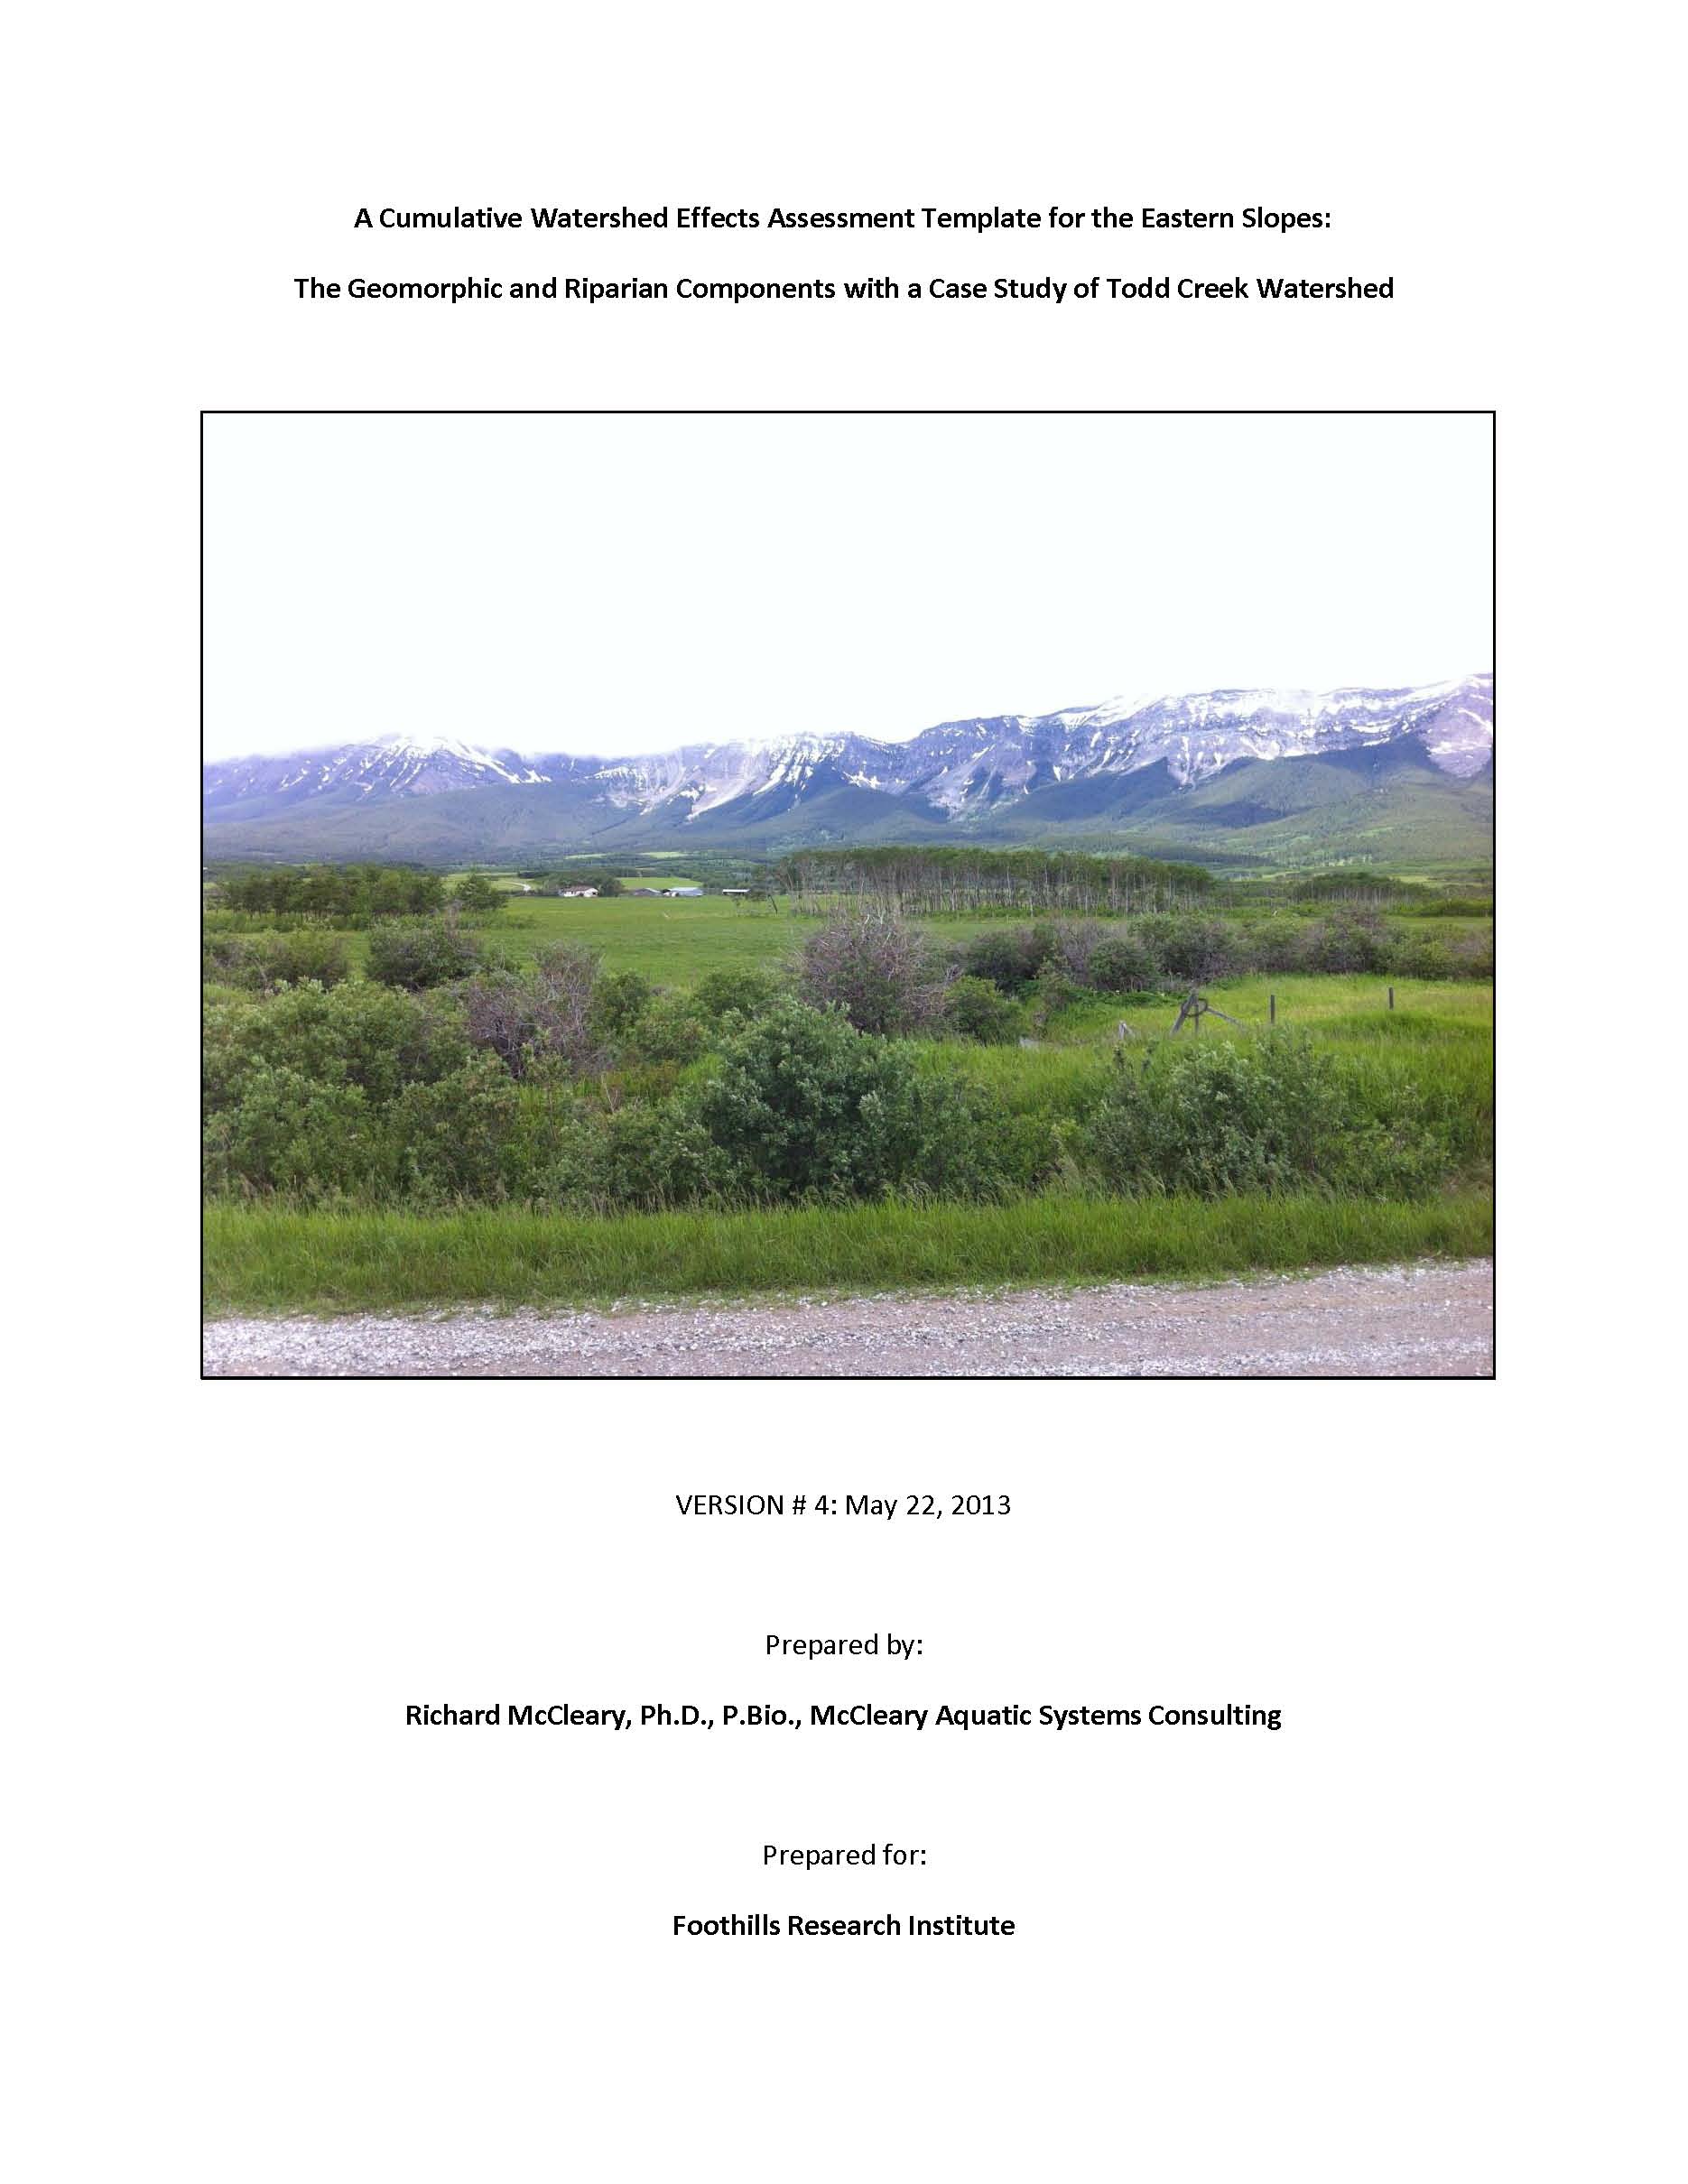 A Cumulative Watershed Effects Assessment Template for the Eastern Slopes: The Geomorphic and Riparian Components with a Case Study of Todd Creek Watershed